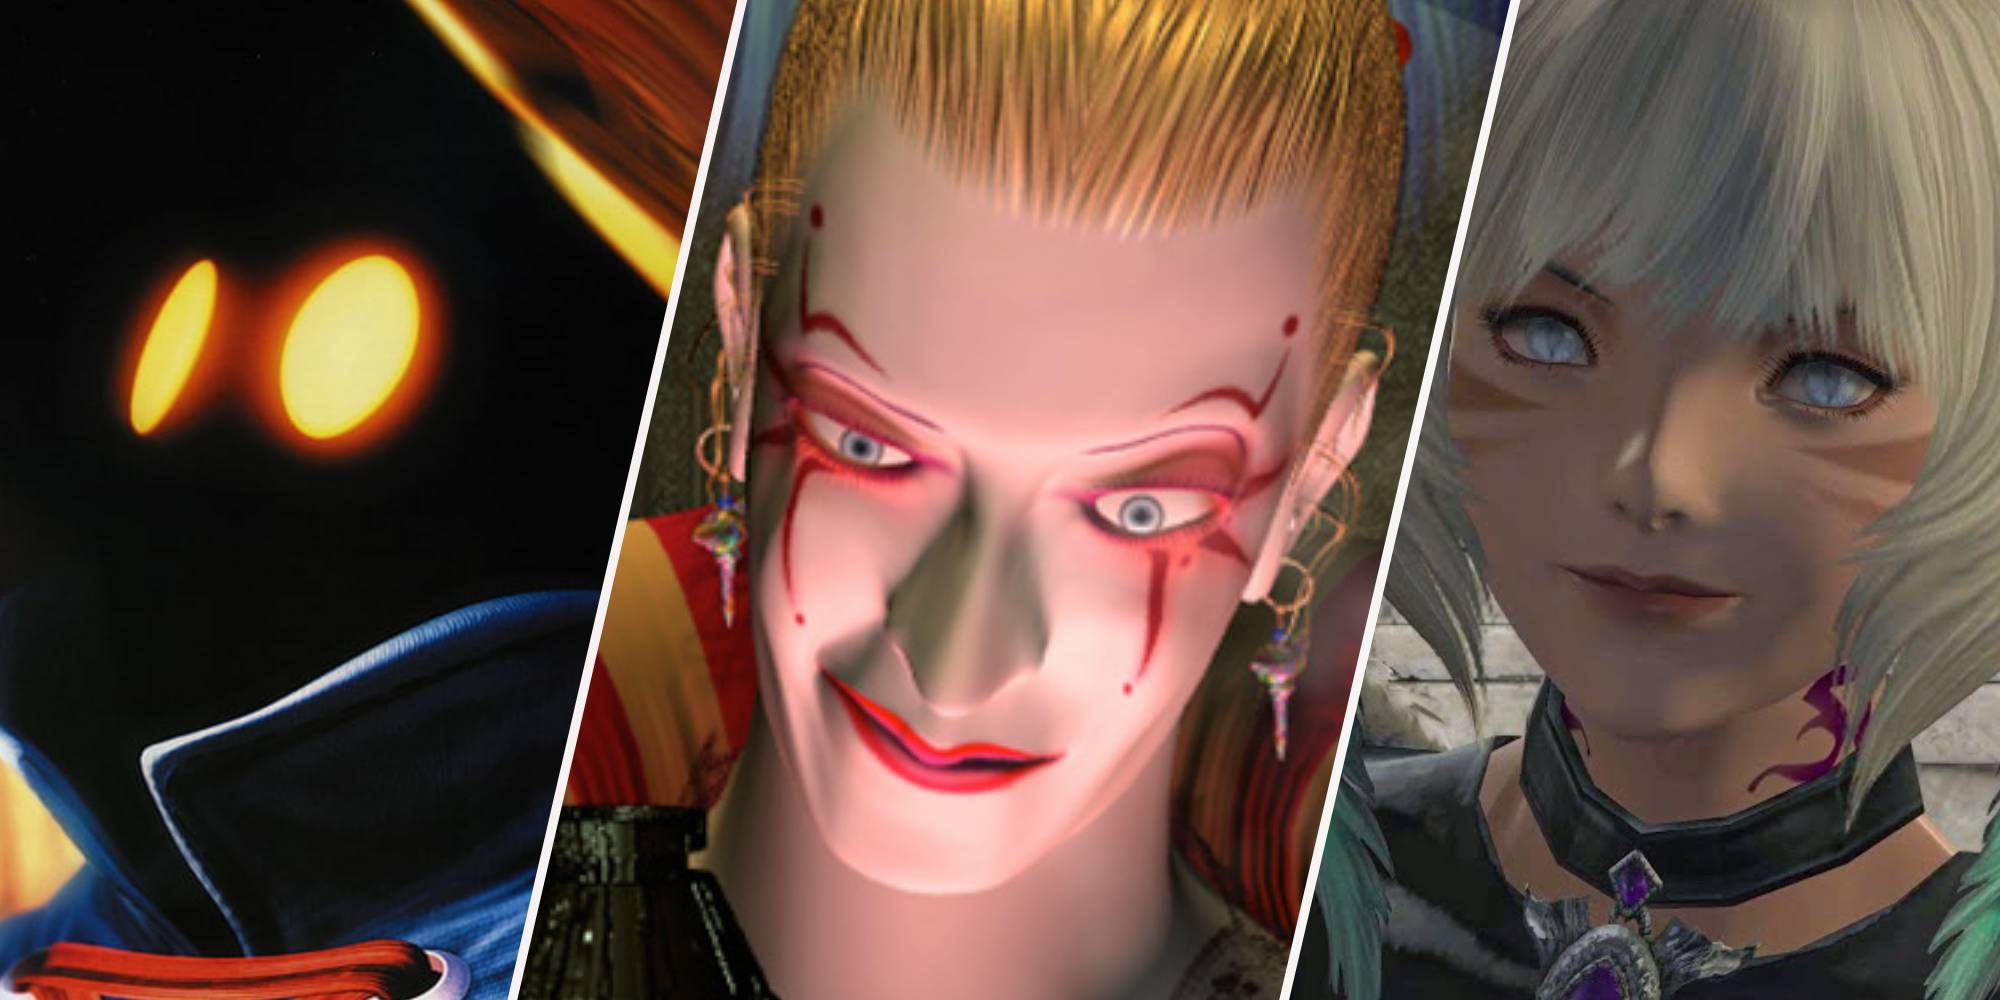 Vivi from FF9, Kefka from FF6, and Y'shtola from FF14